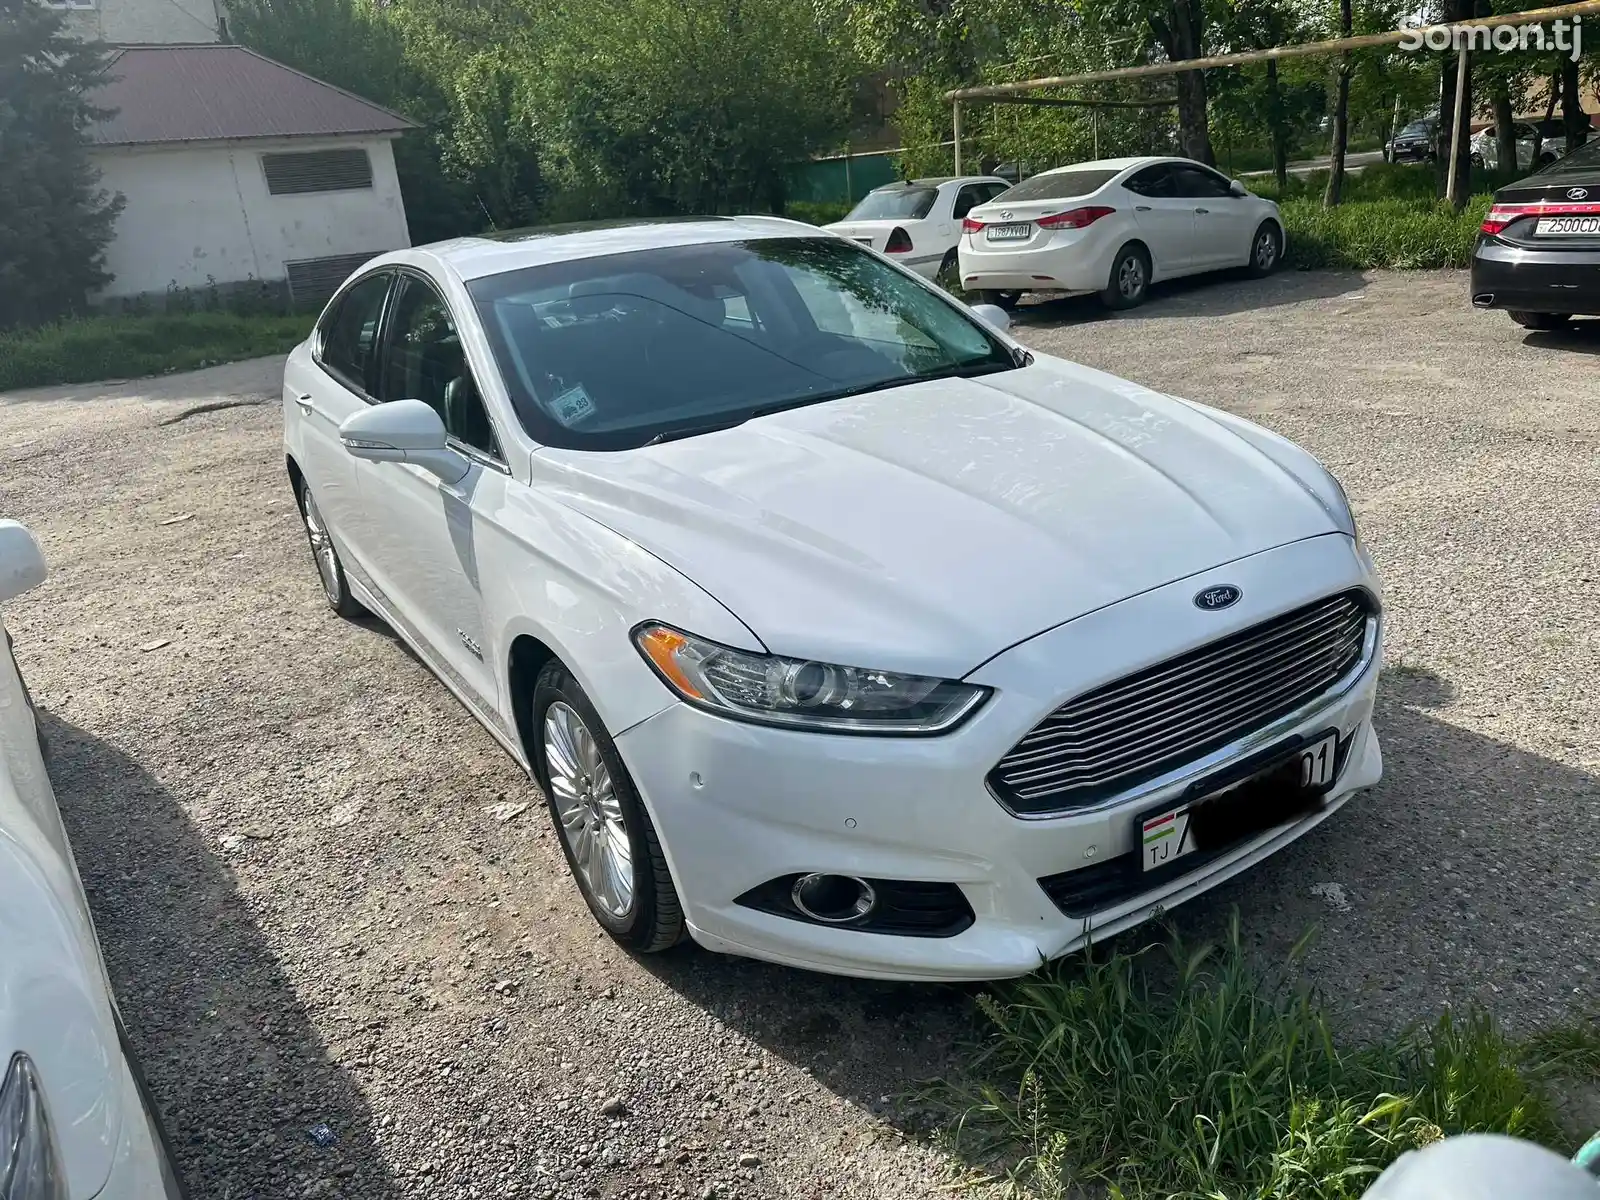 Ford Fusion, 2014-2